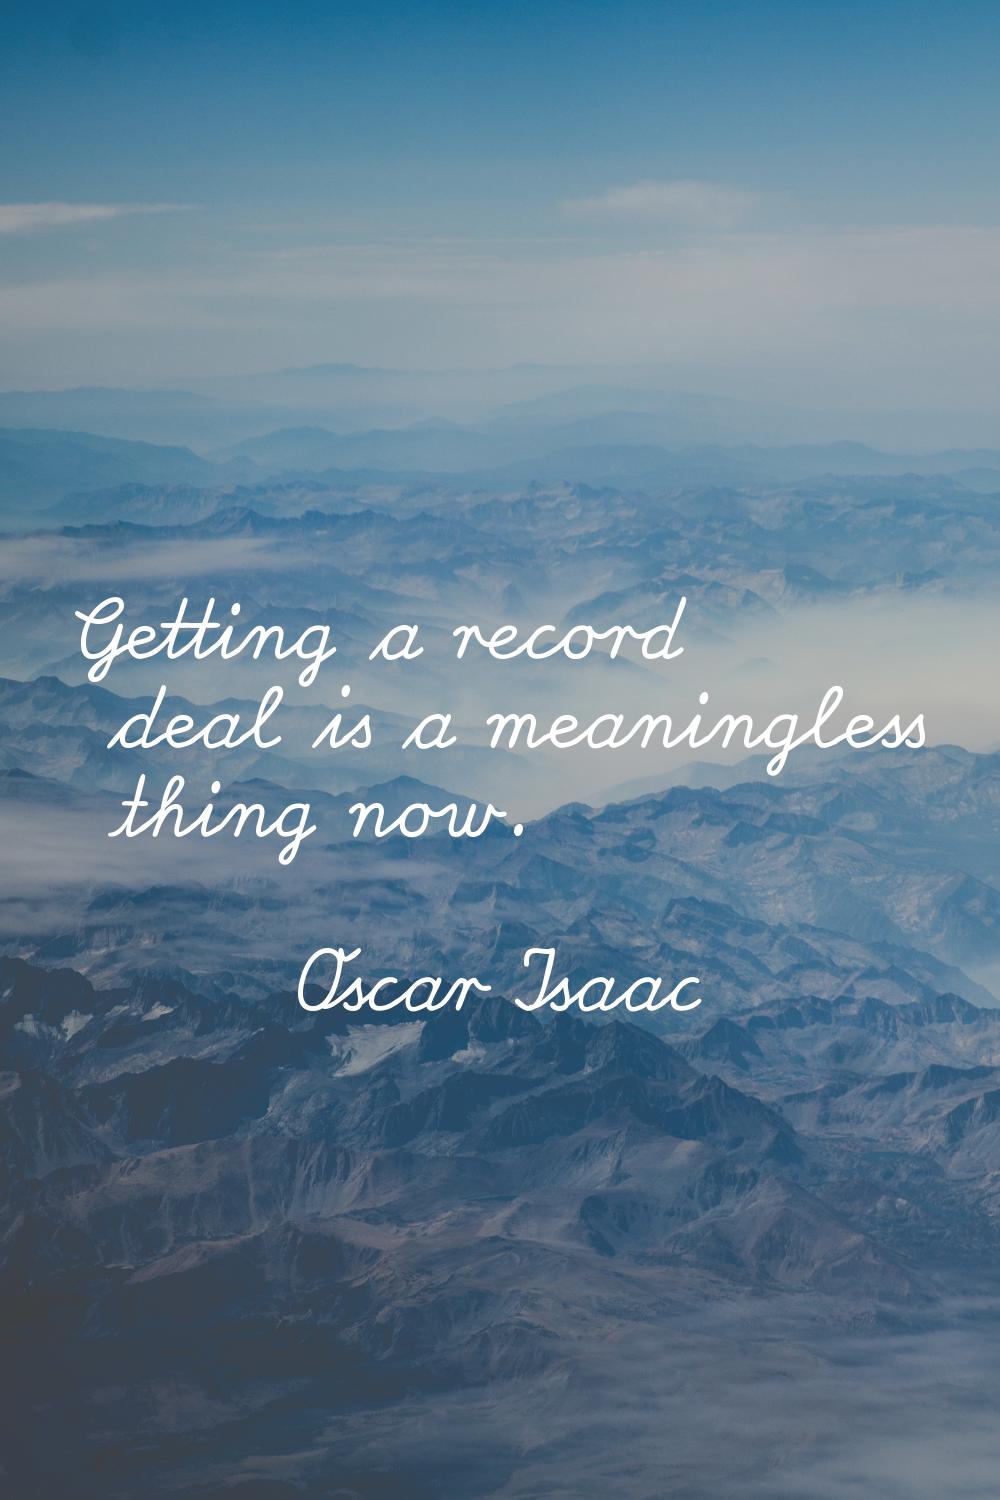 Getting a record deal is a meaningless thing now.